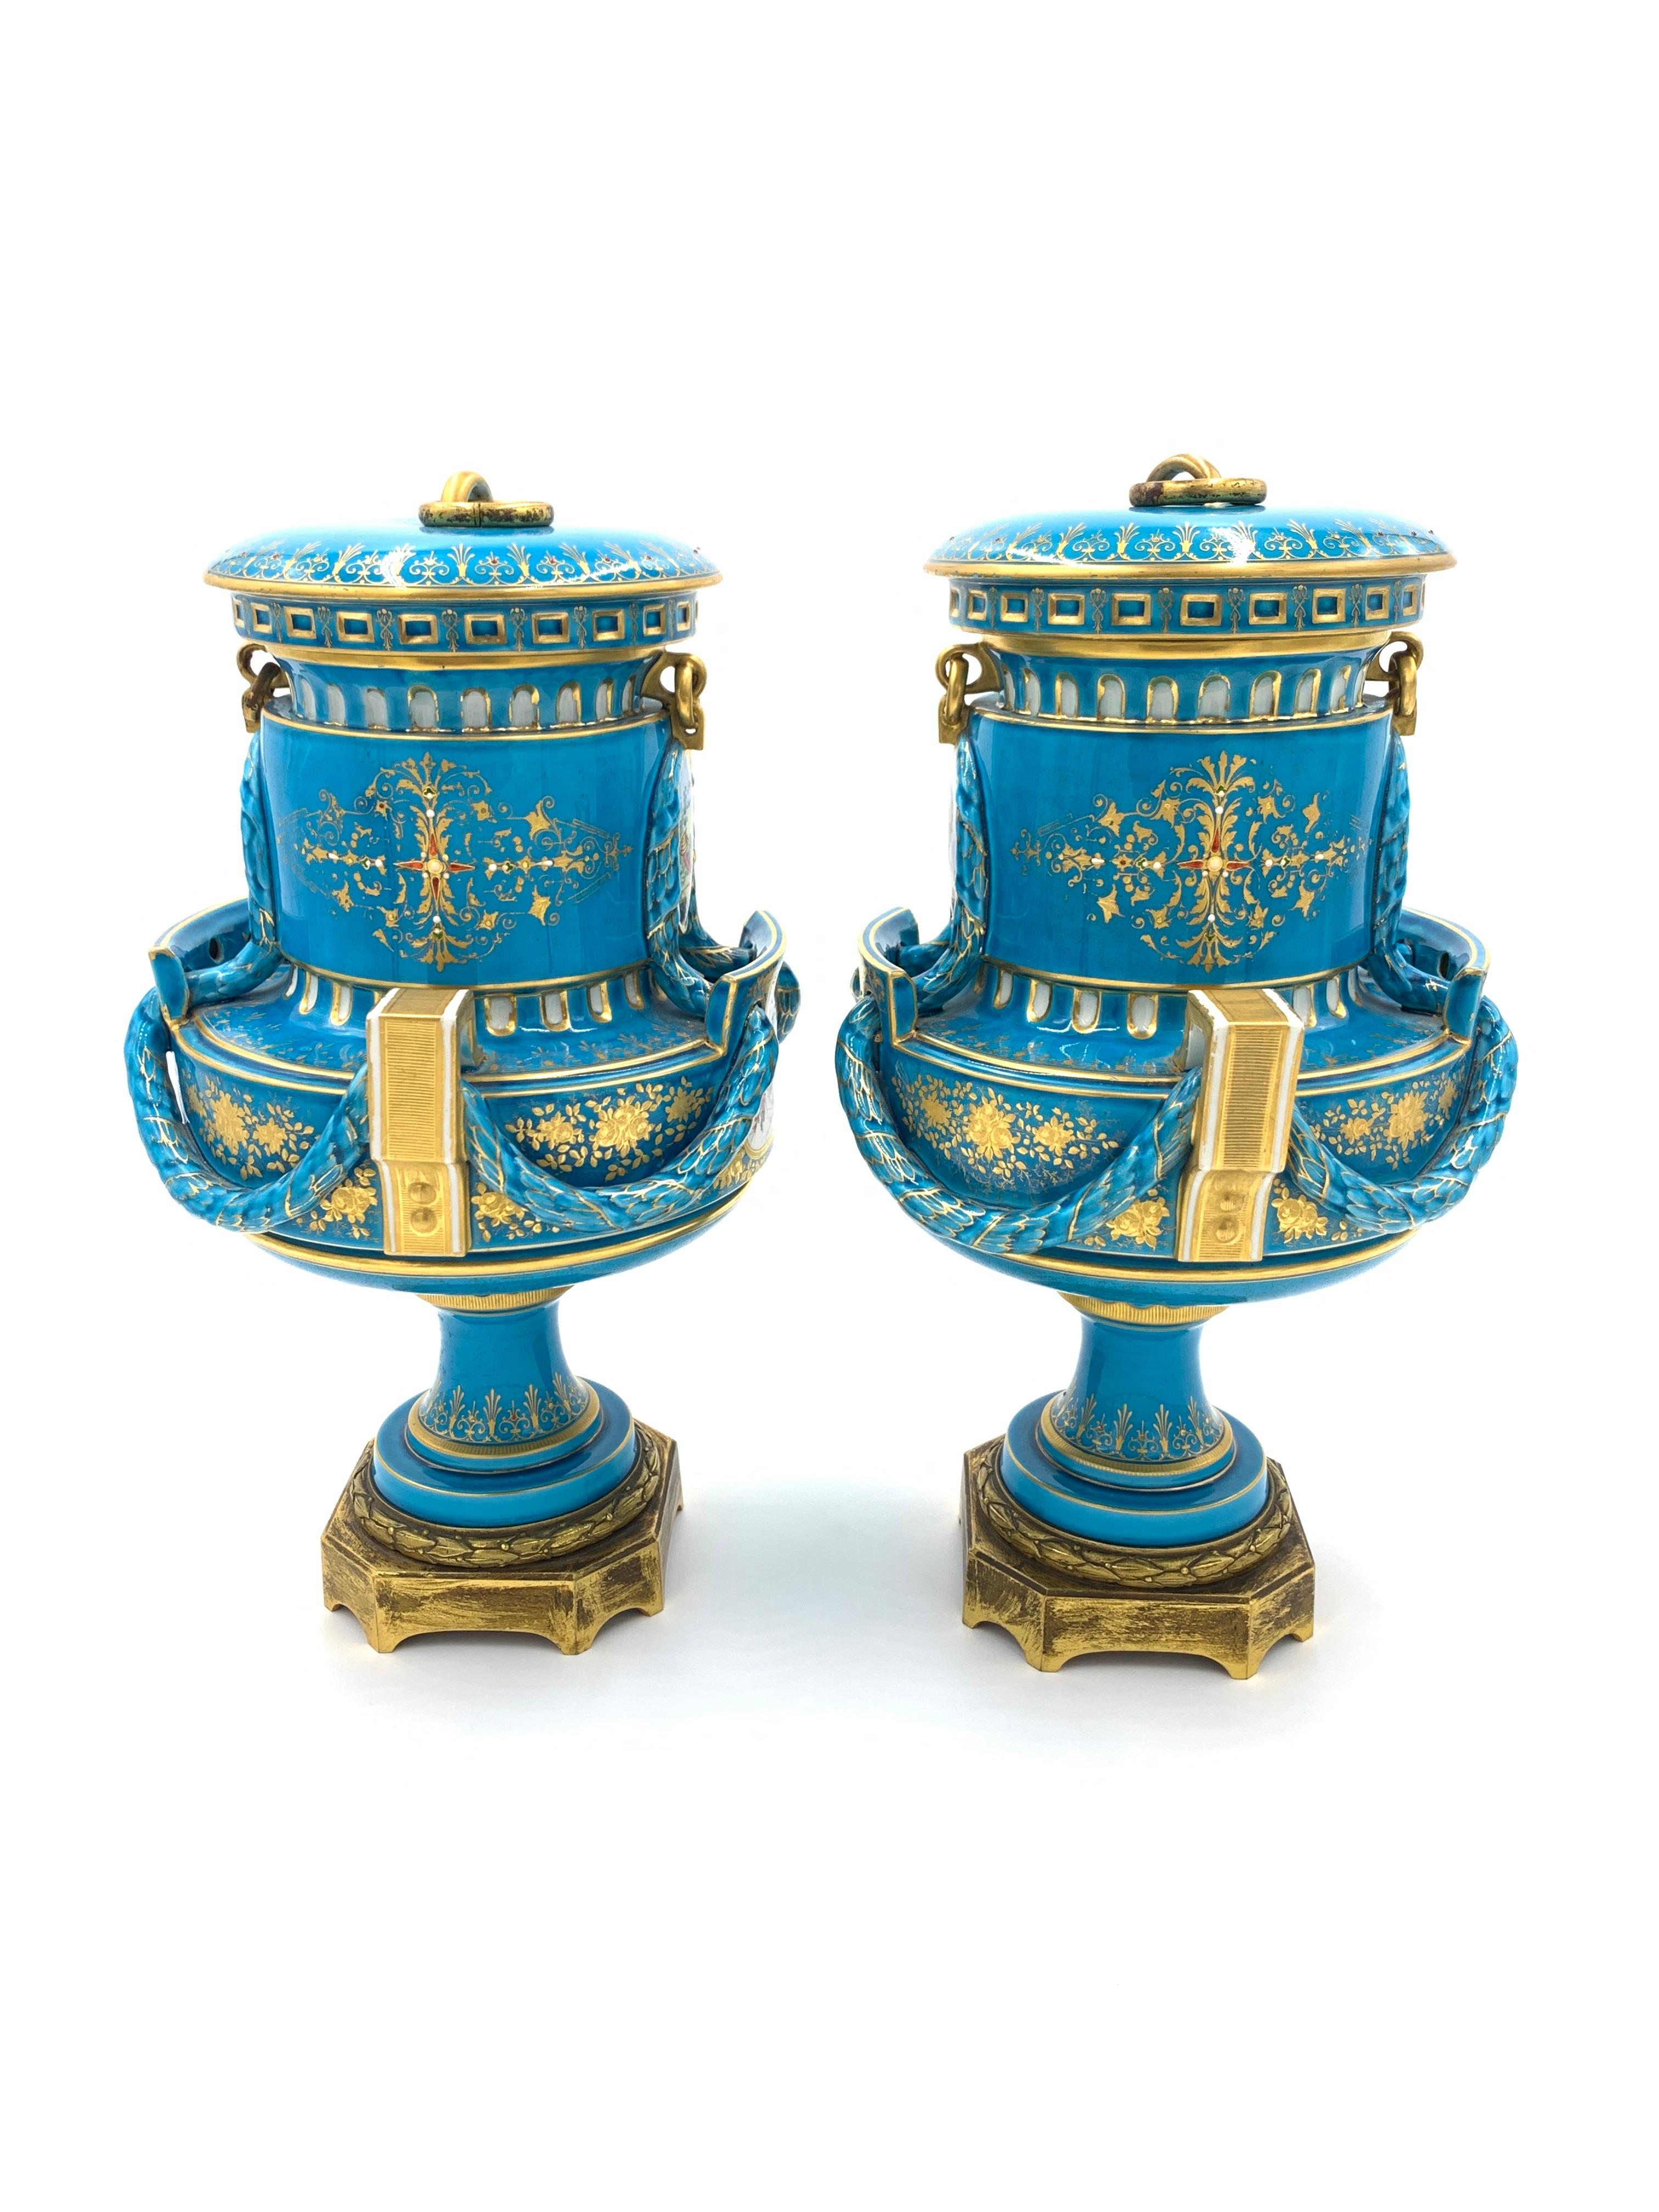 19th century sky blue sevres style vases with gold inlaid, the front of the vases depicts a portrait of two women’s and beneath it a painting for a mother and child in a garden setting while the reverse of the vases depicts exceptional birds.
 